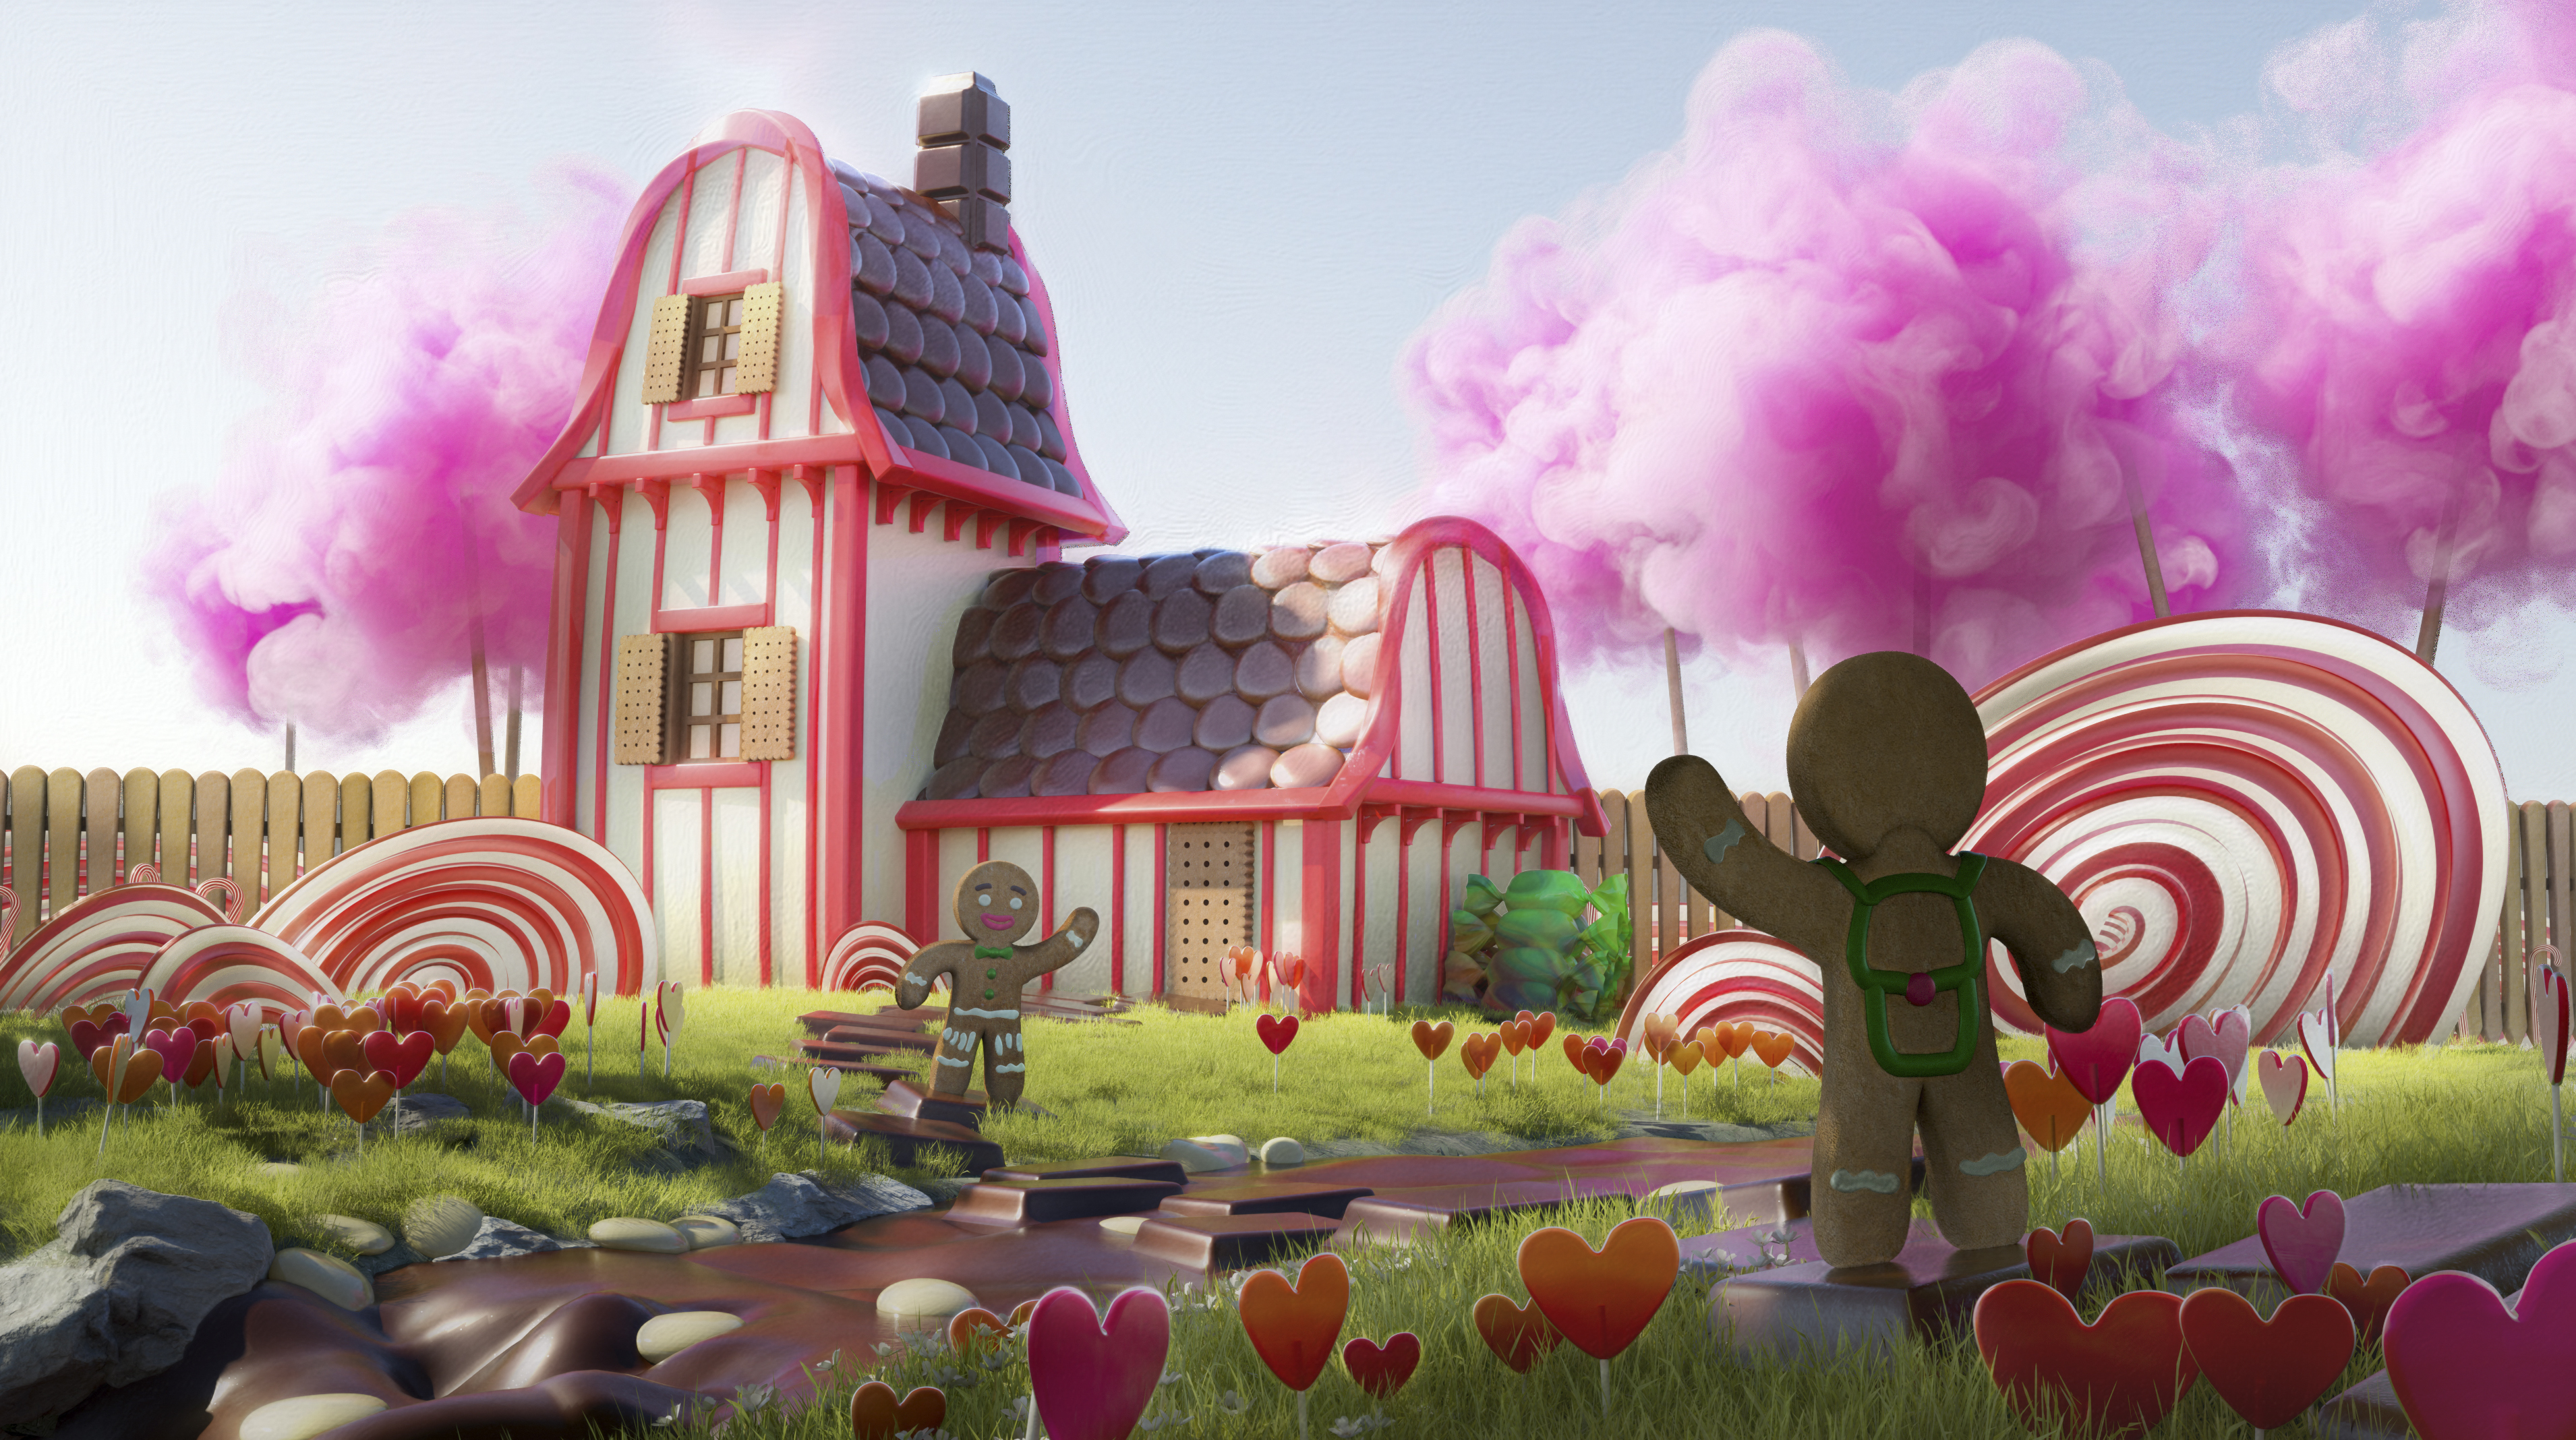 8 Kids Draw Their Own Version Of A Dream Garden, And 3D Artists Take It And Make It Real